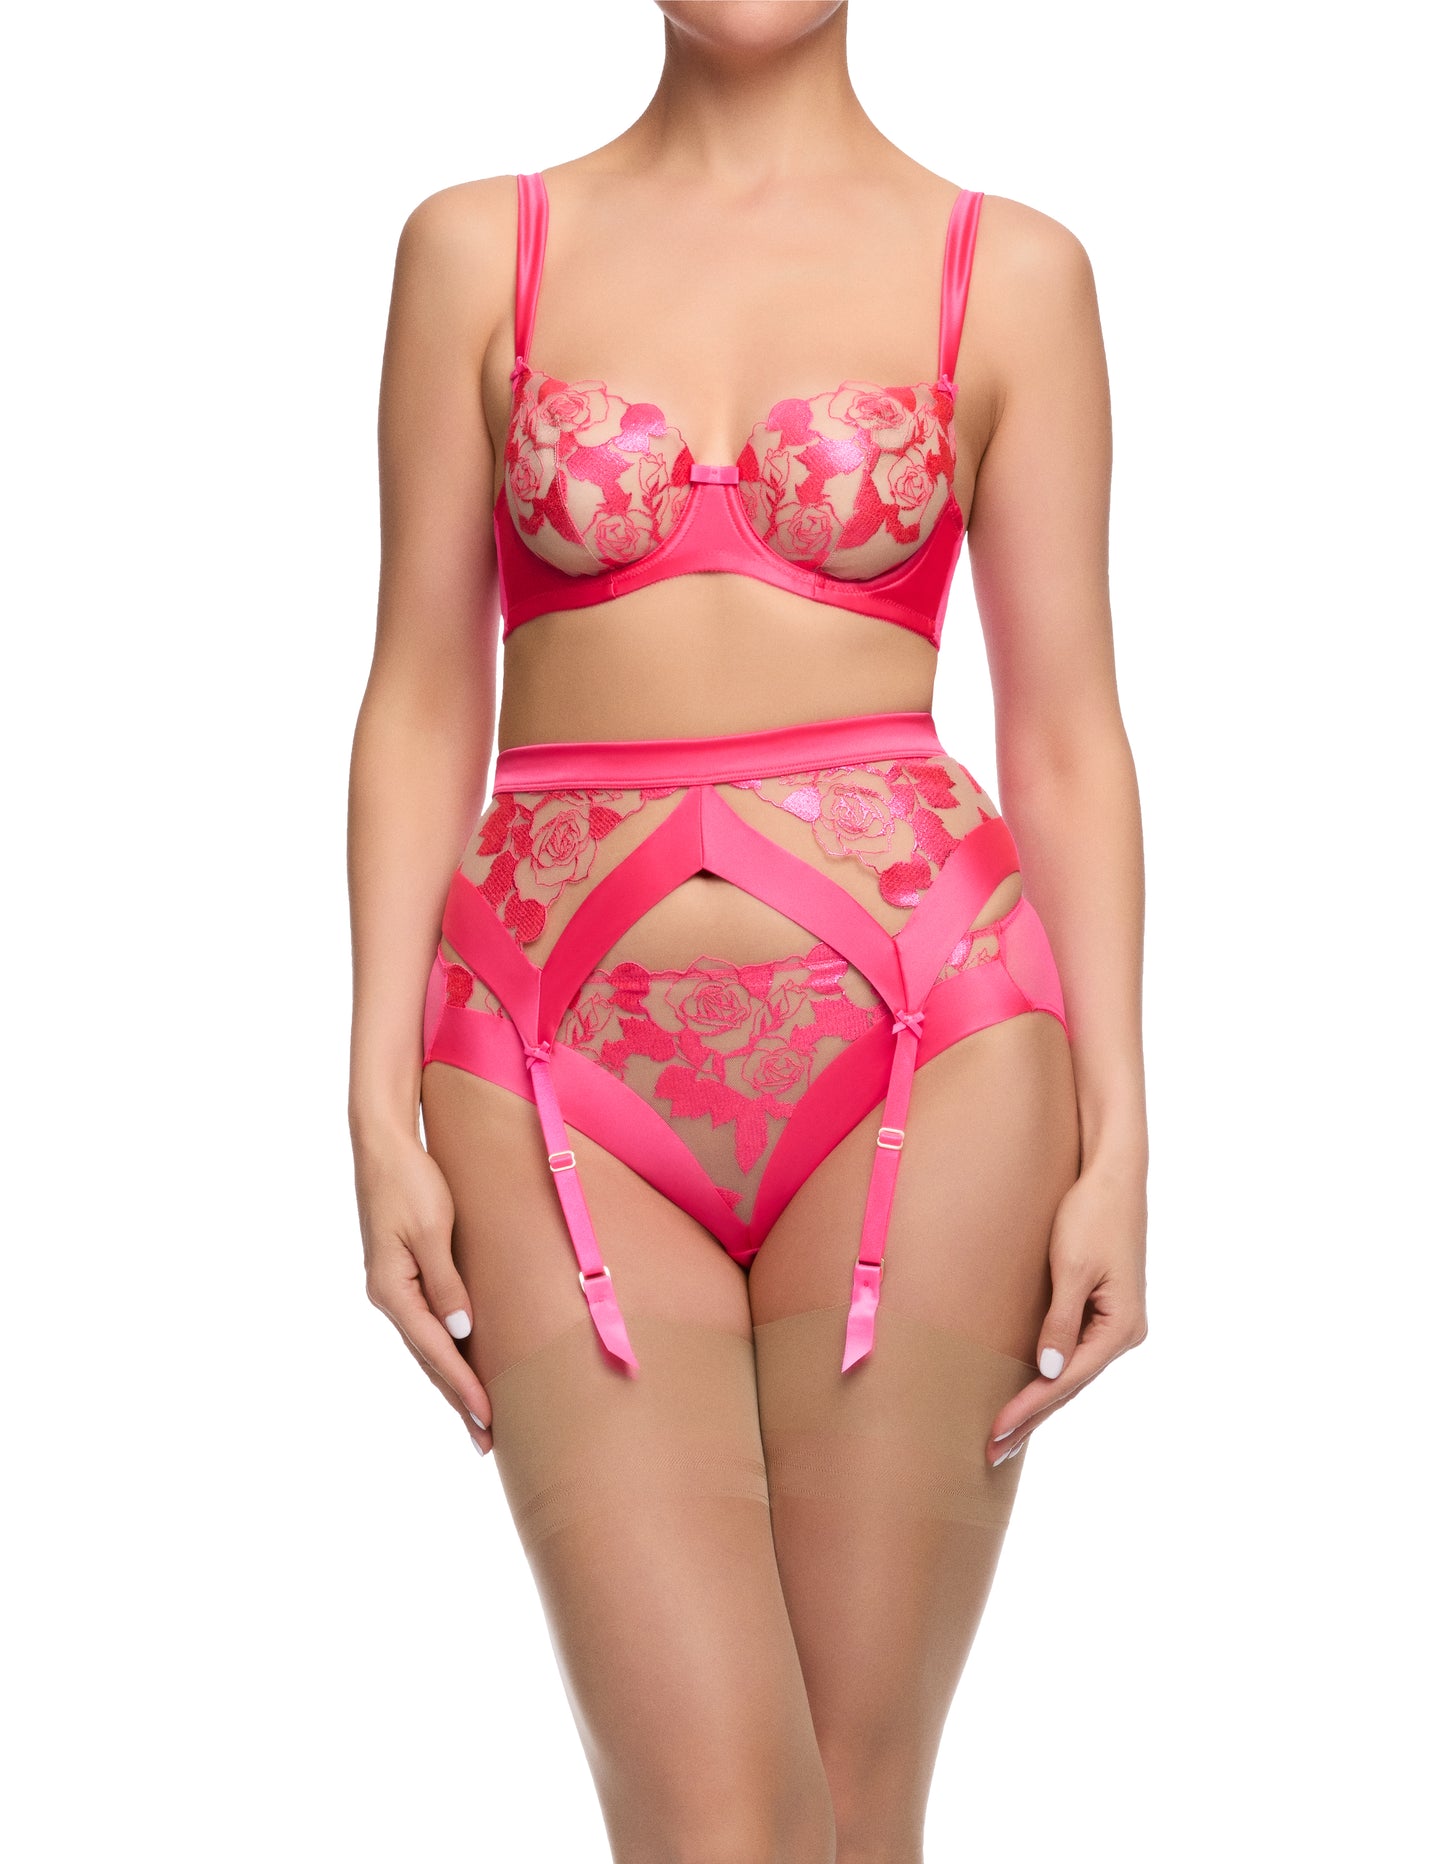 Rosabelle Thong In Pink Pizzazz By Dita Von Teese - L